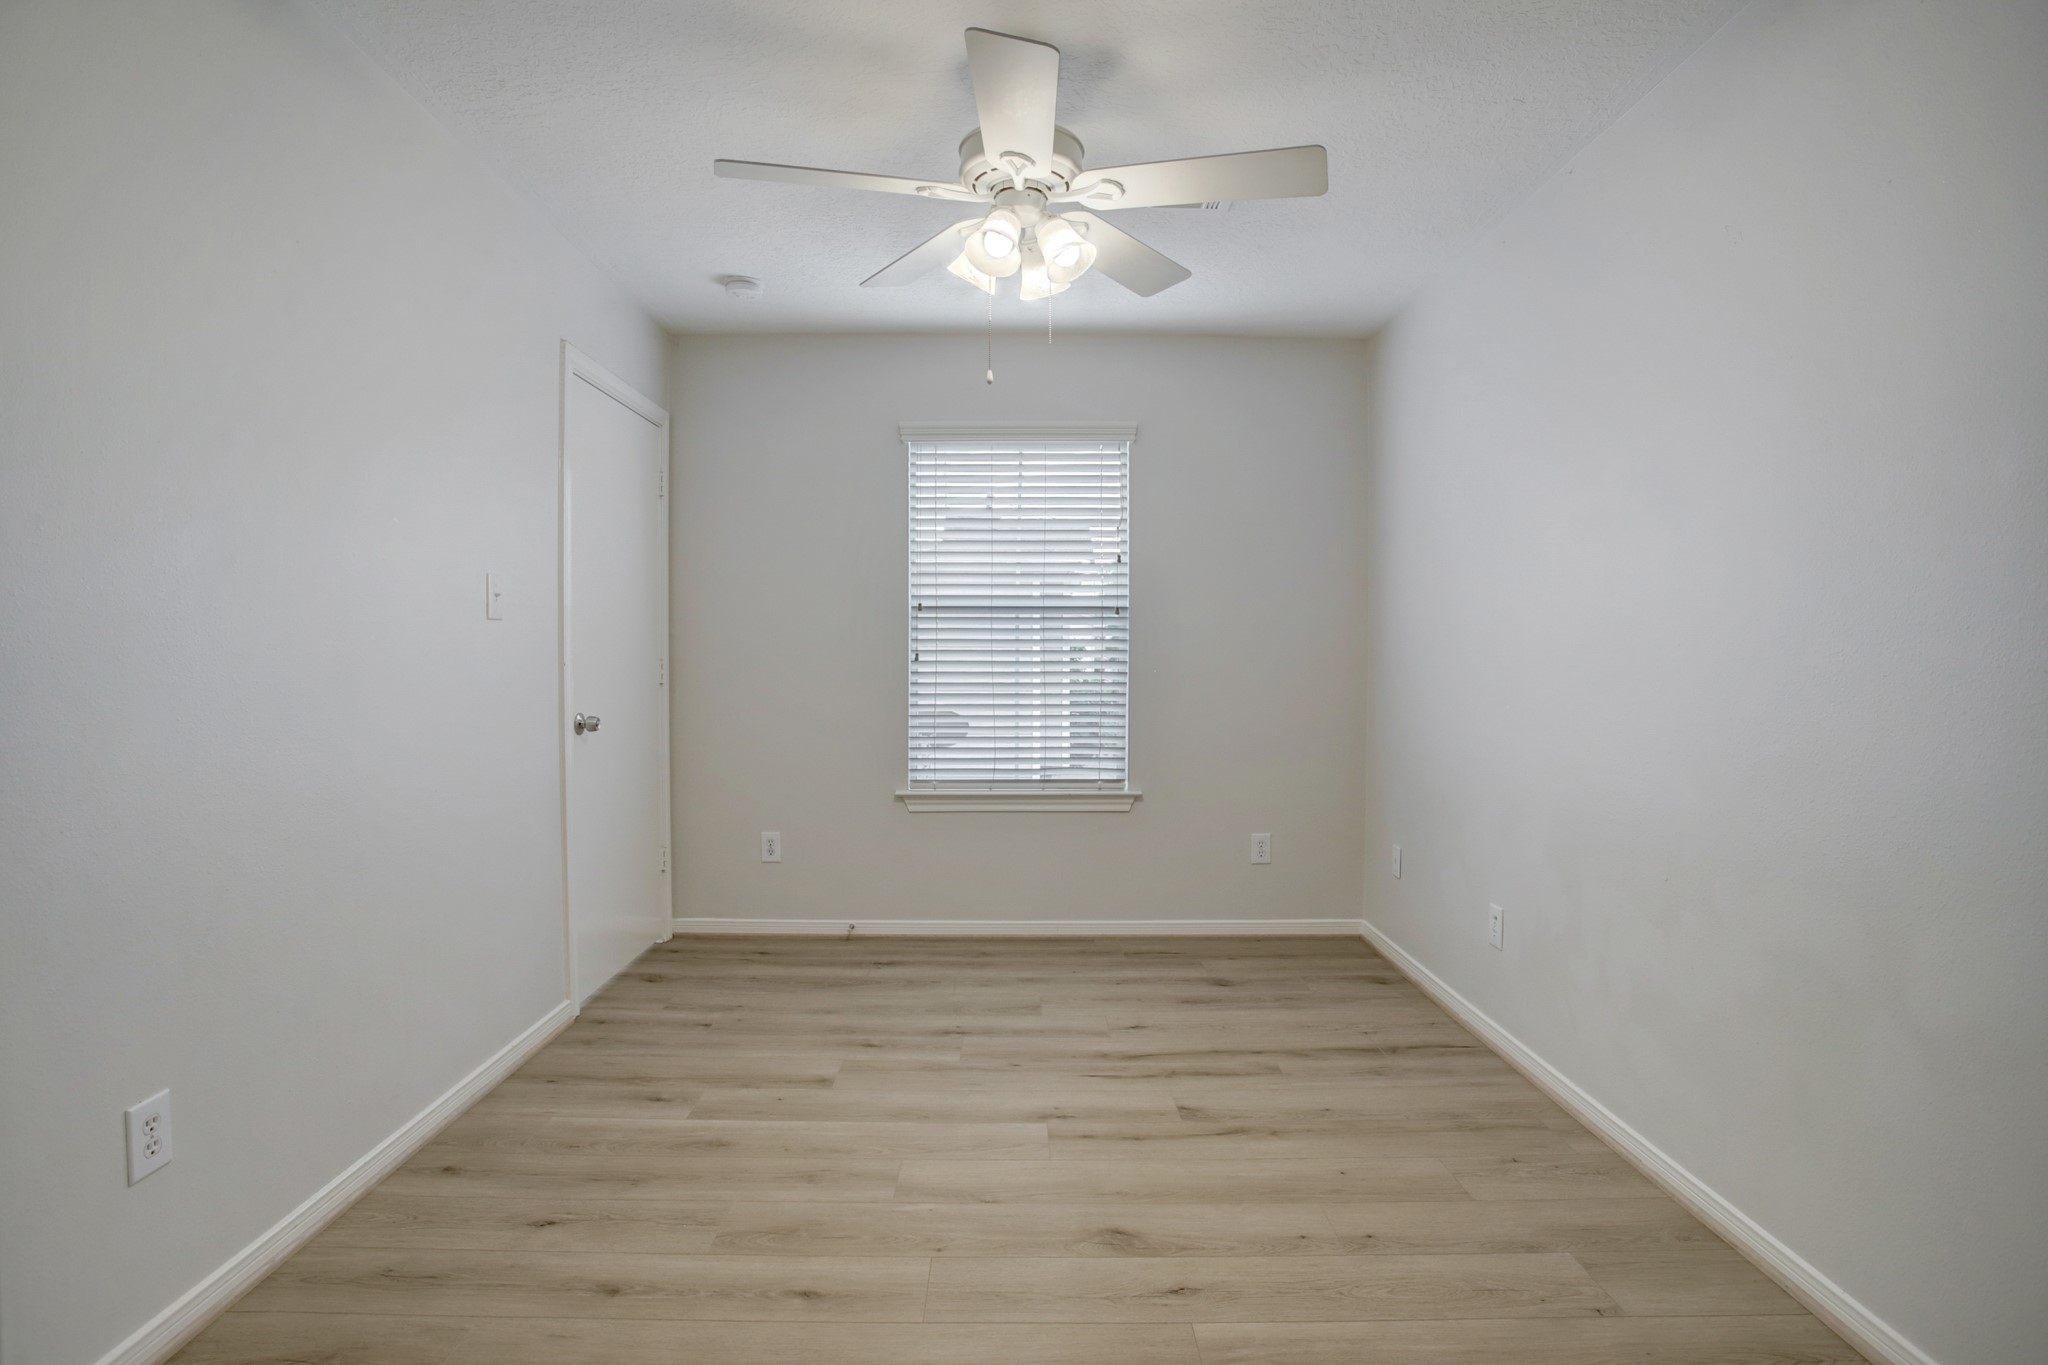 Another roomy bedroom with a large walk in closet, new floor, blinds and a ceiling fan.